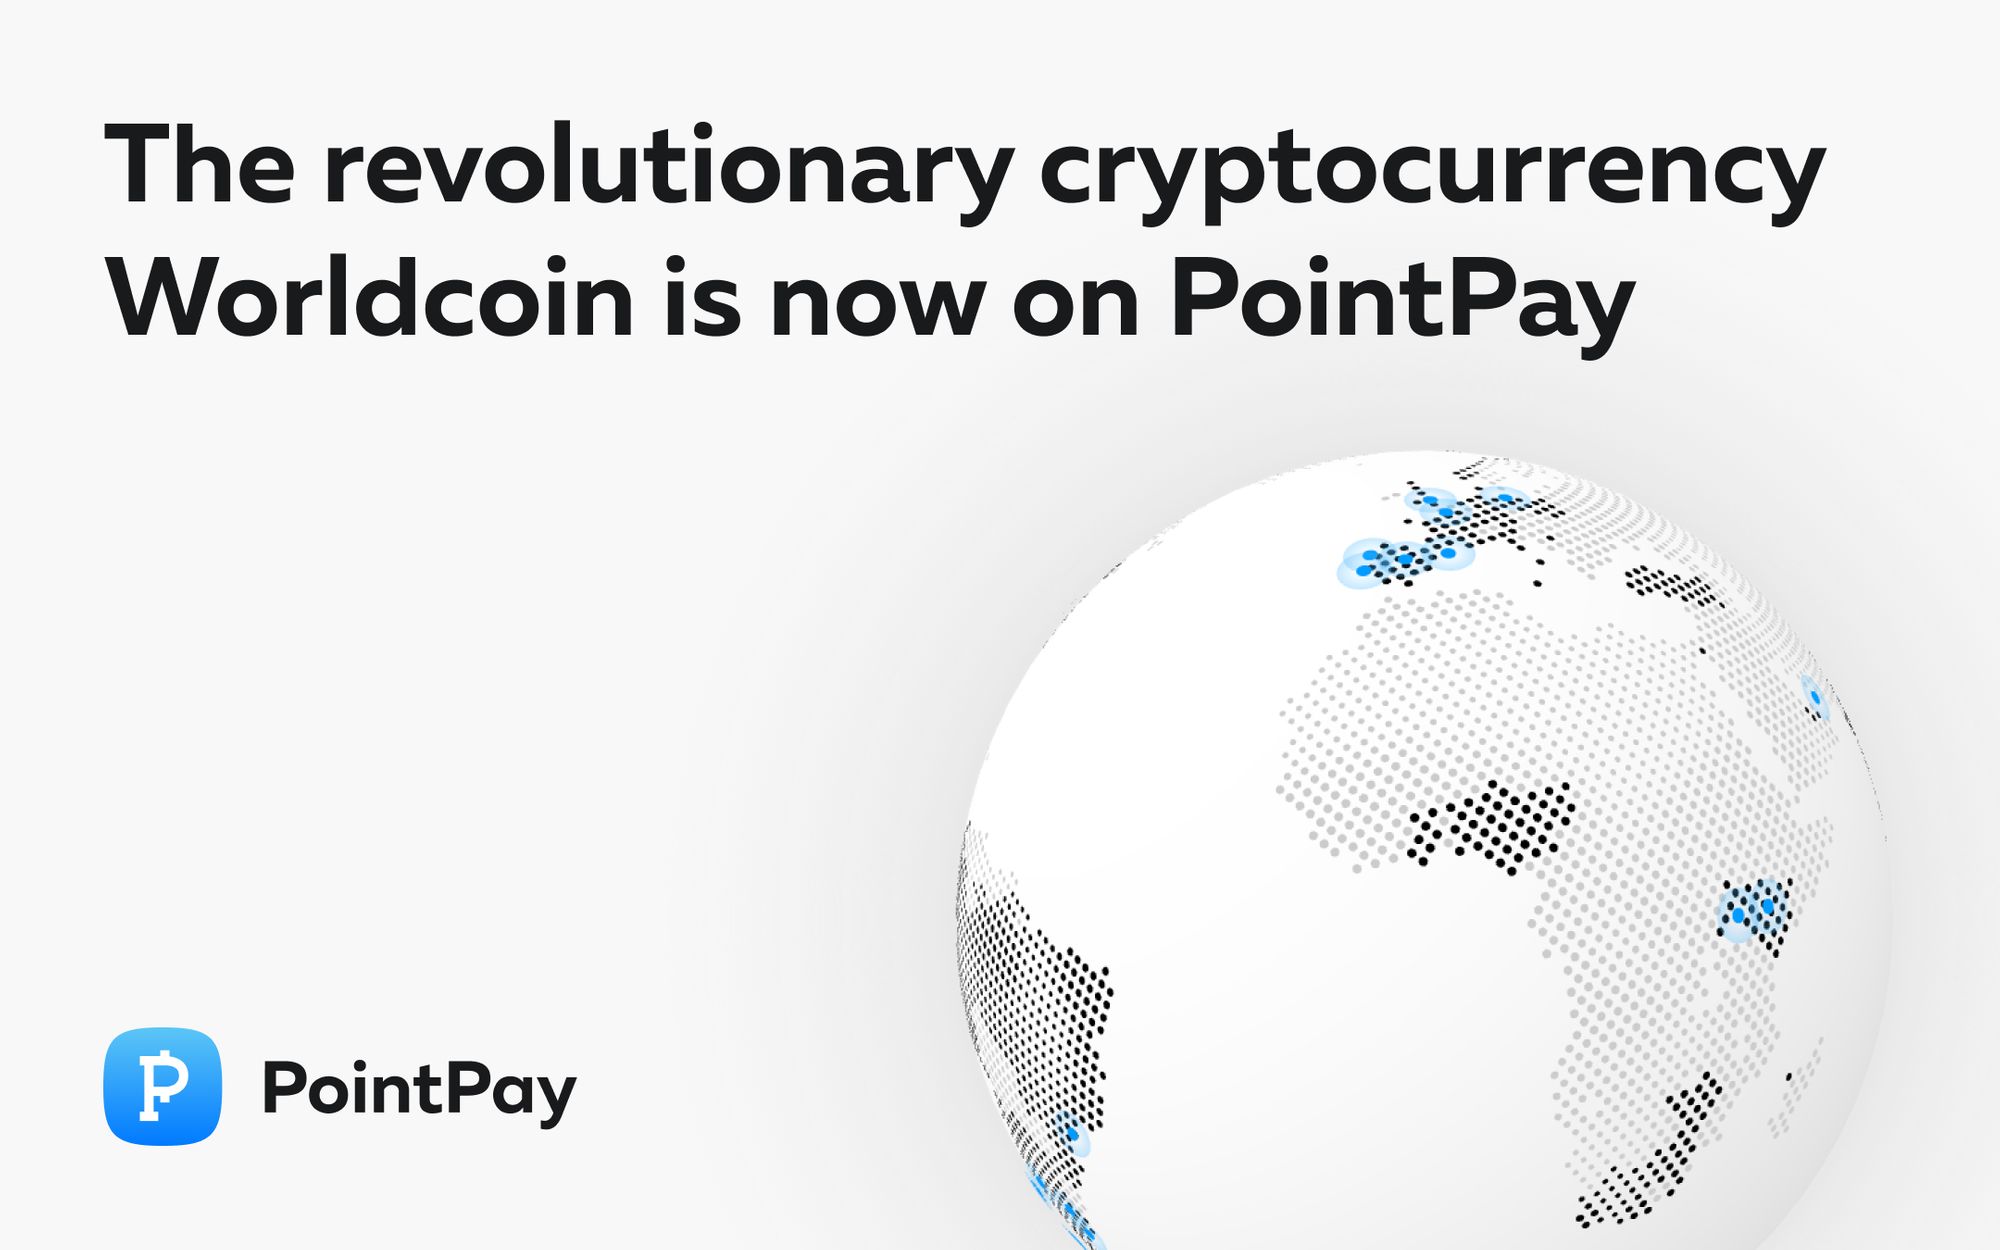 Introducing Worldcoin on PointPay!